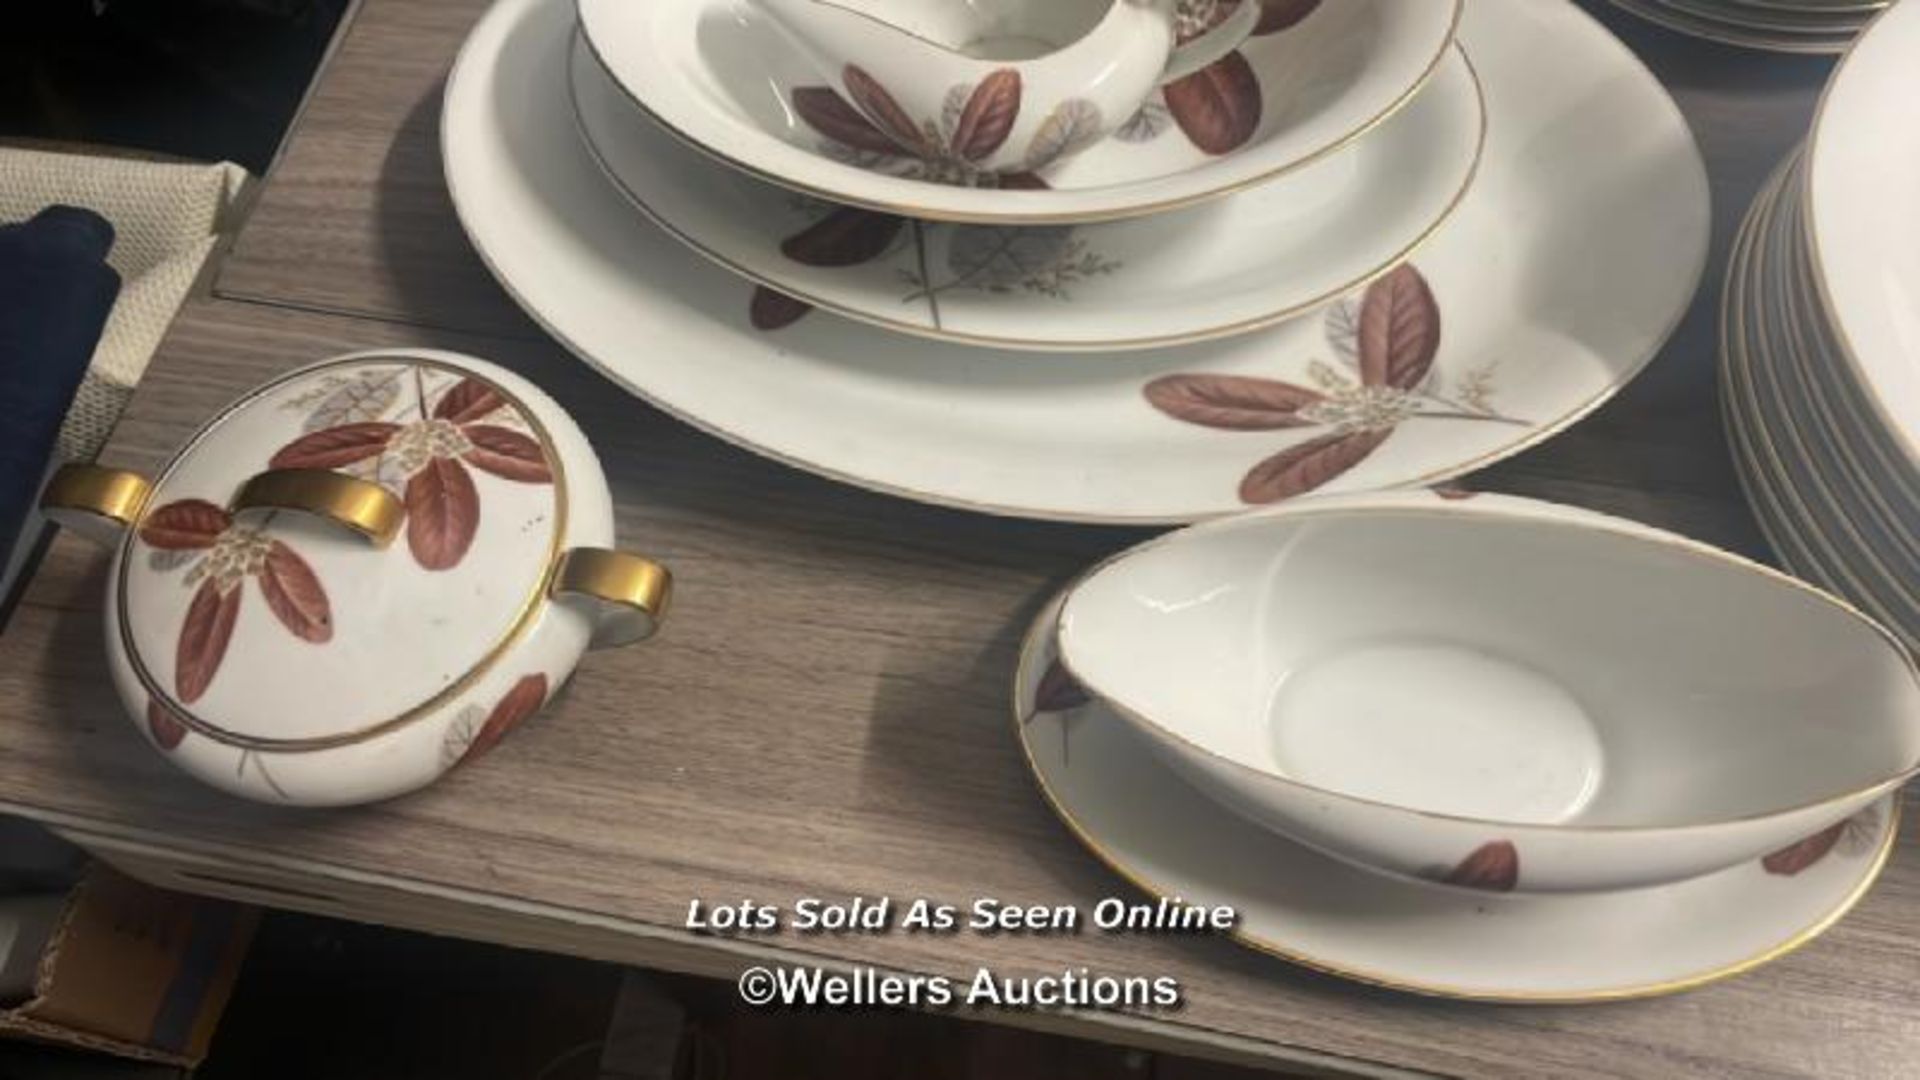 A PART NORITAKE CHINA TABLE SERVICE INCLUDING PLATES, SERVING DISHES & CUPS (62) - Image 11 of 12